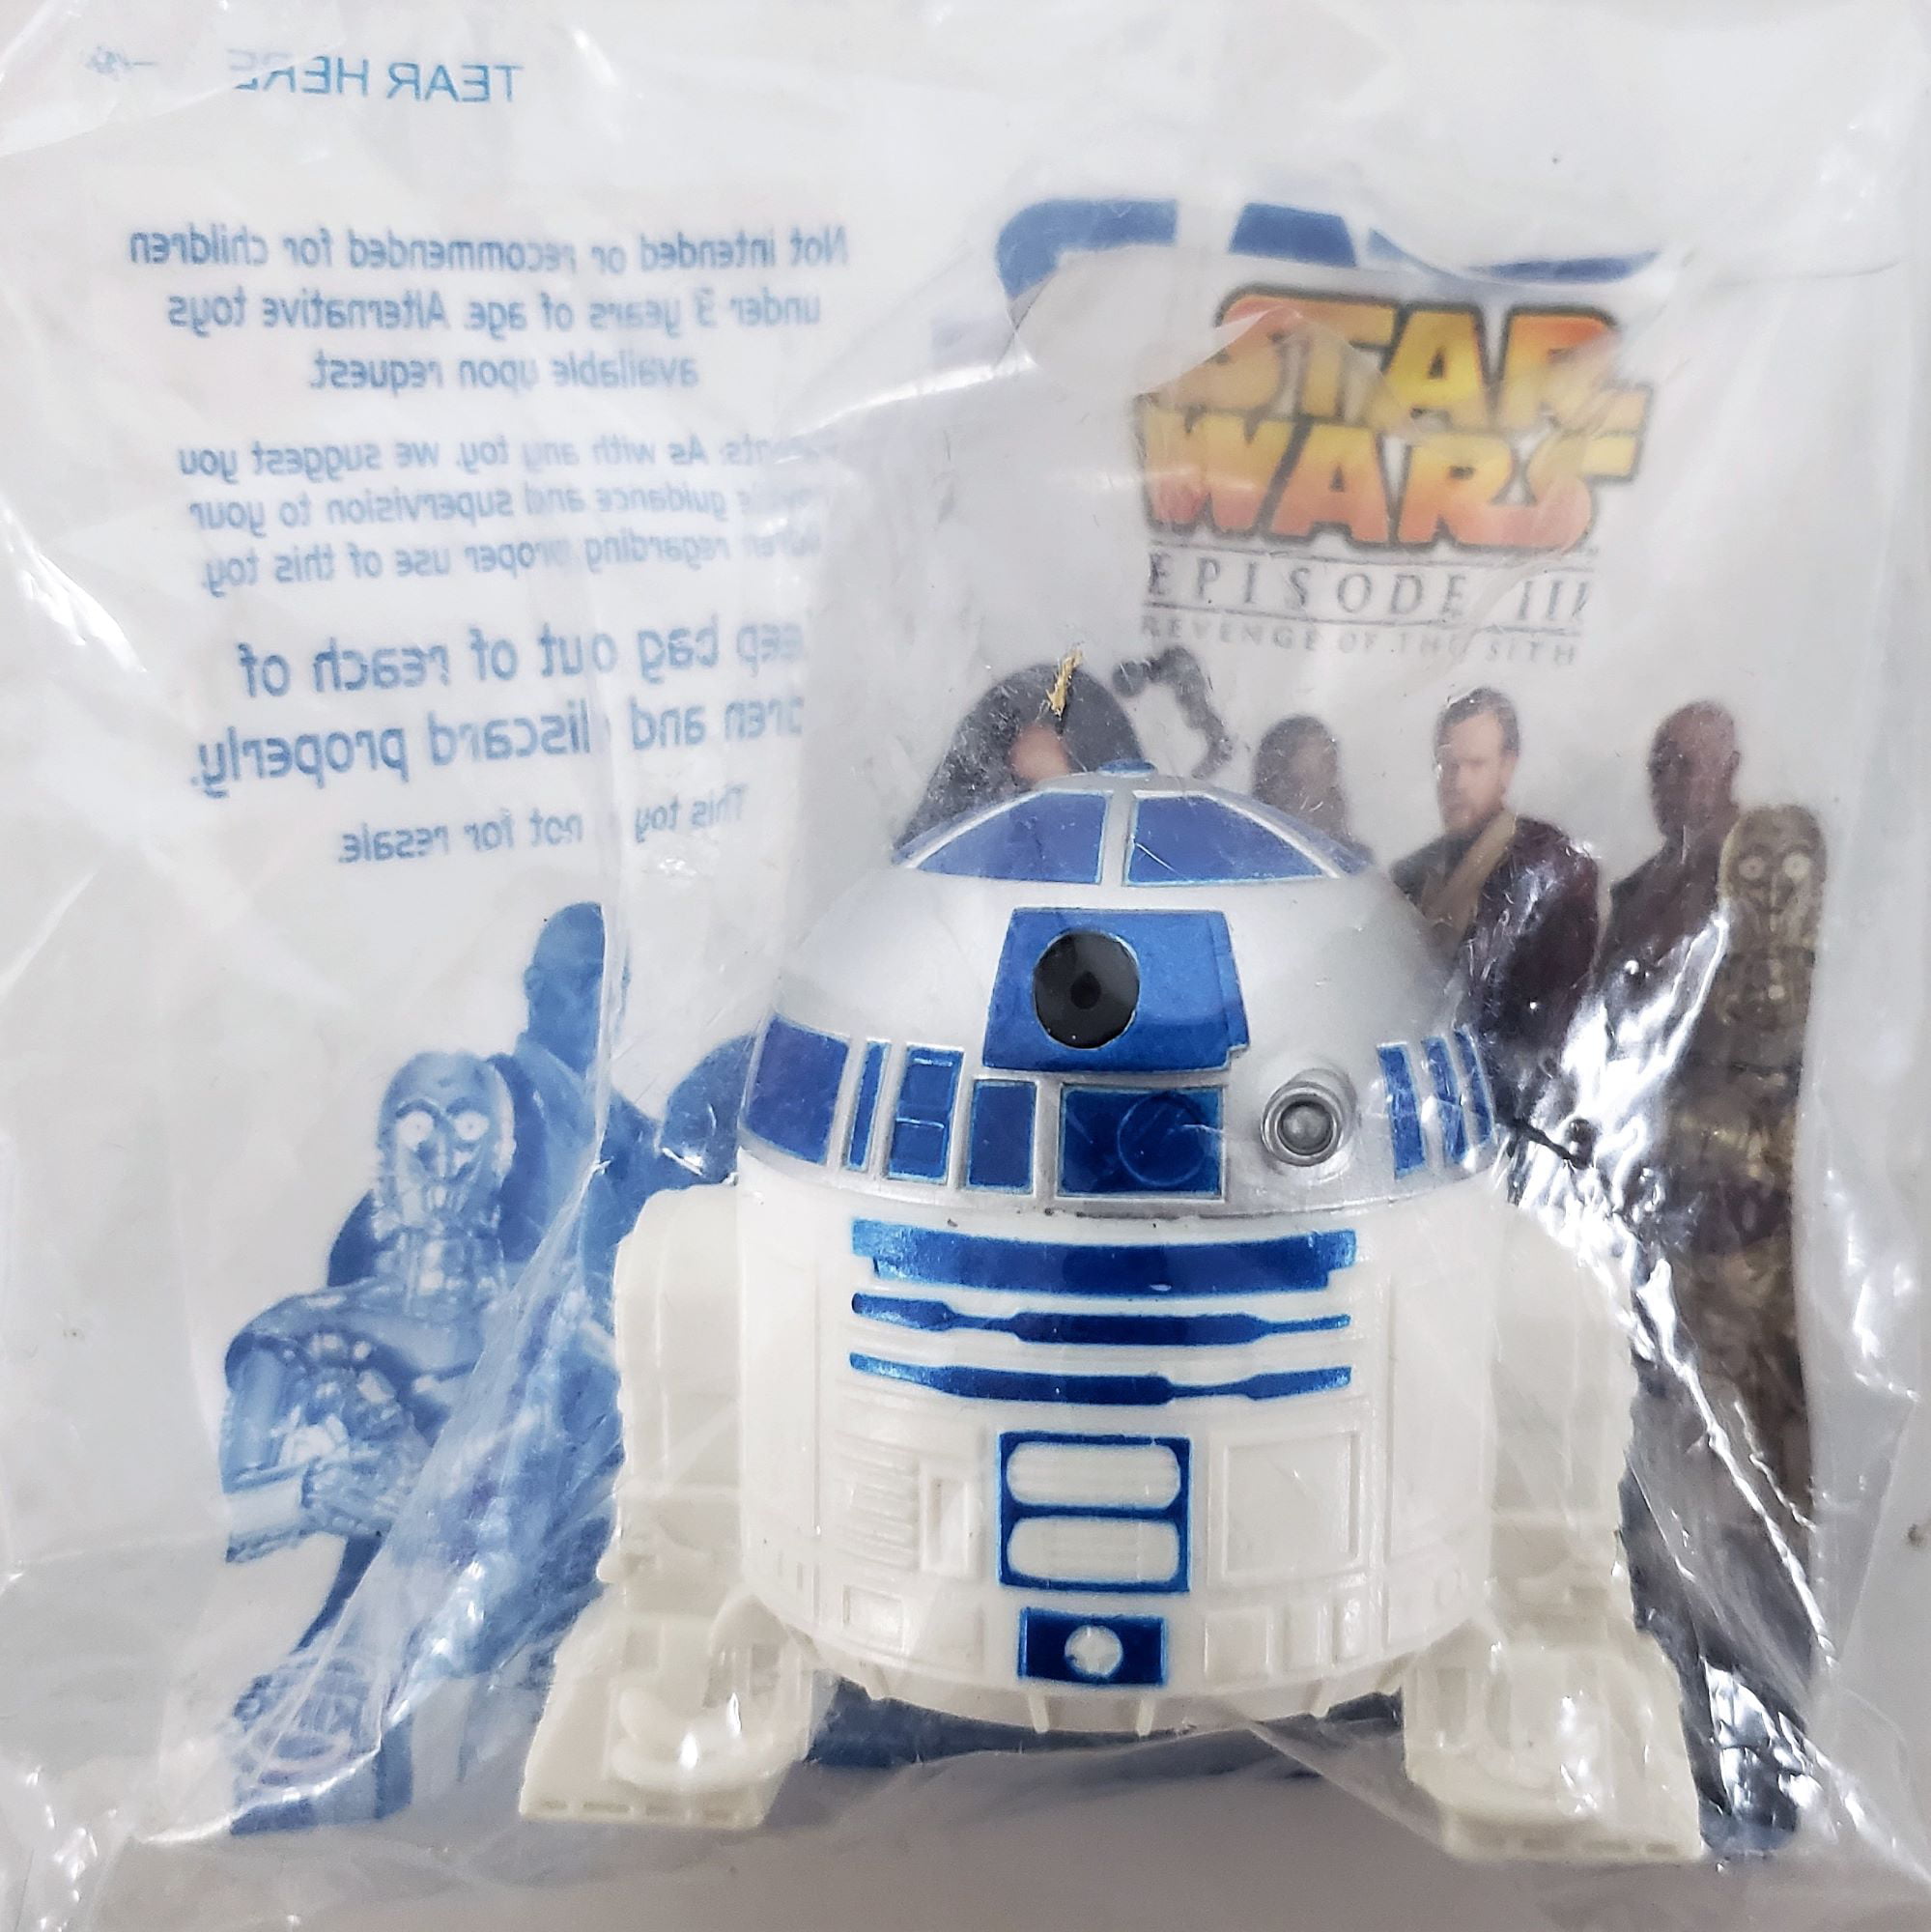 Star Wars Episode Iii Revenge Of The Sith 2005 Burger King Toy R2d2 